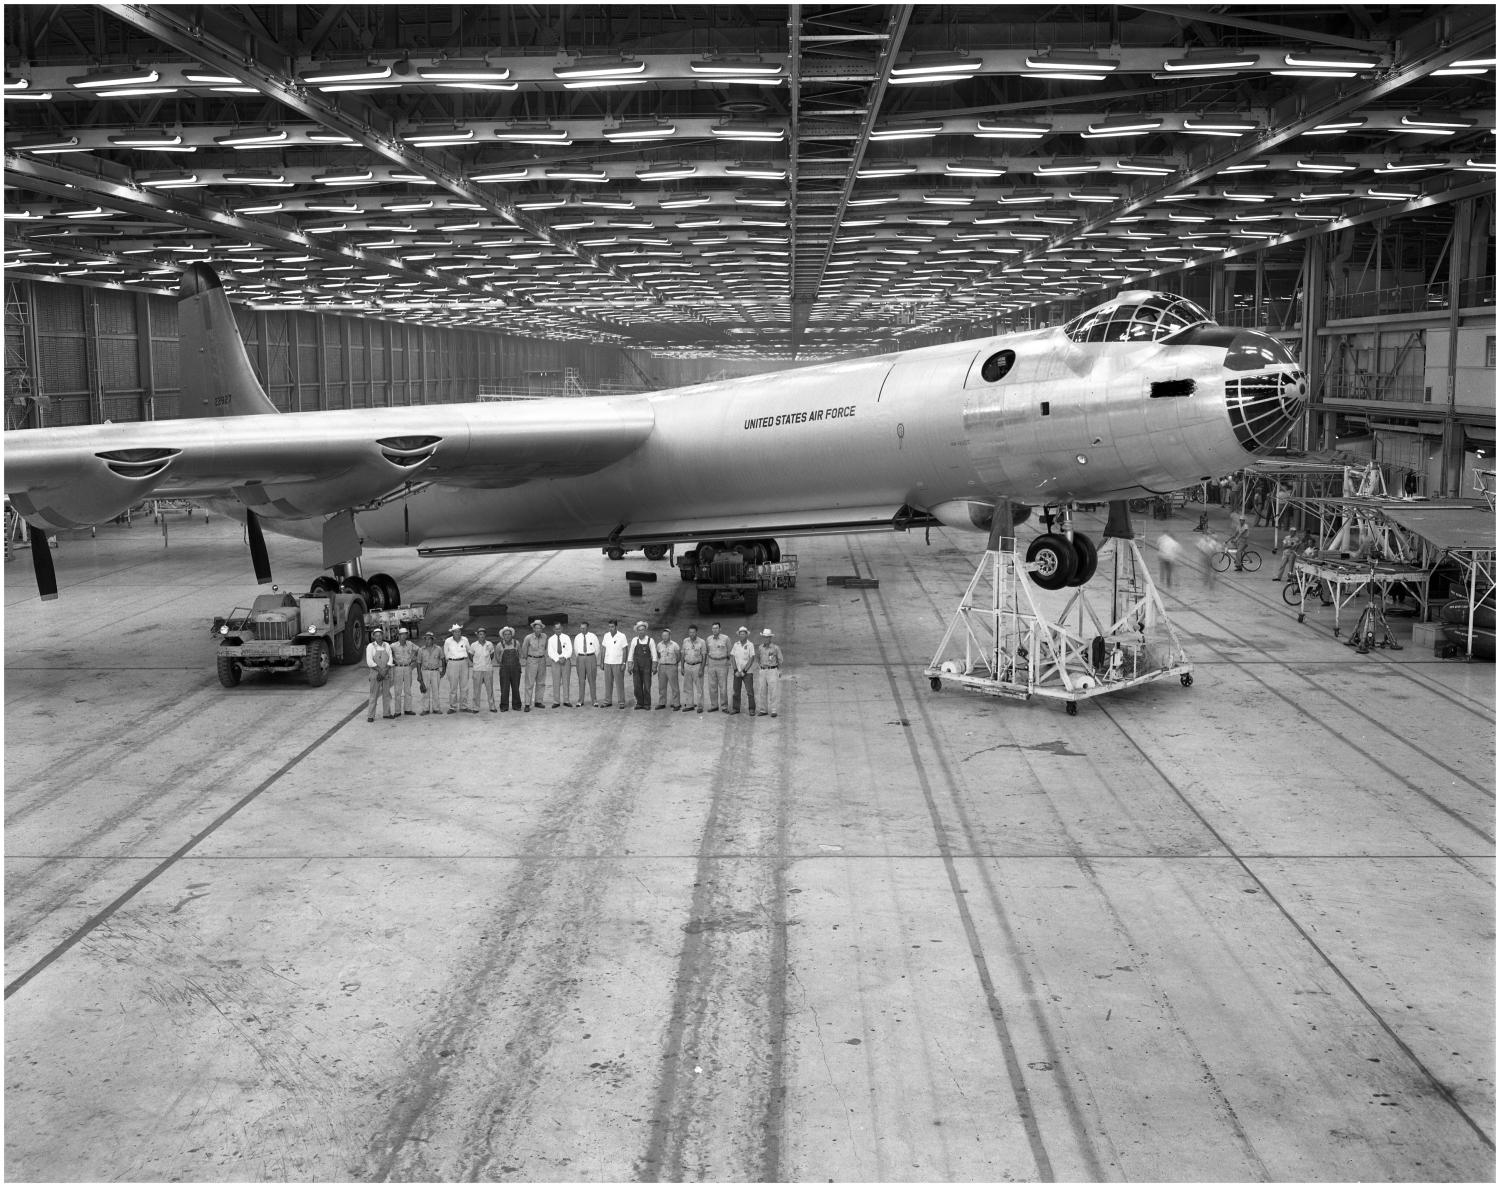 The last Peacemaker, Convair B-36J-10-CF 52-2827, comes to the end of the assembly line at Fort Worth, Texas. (University of North Texas Libraries)